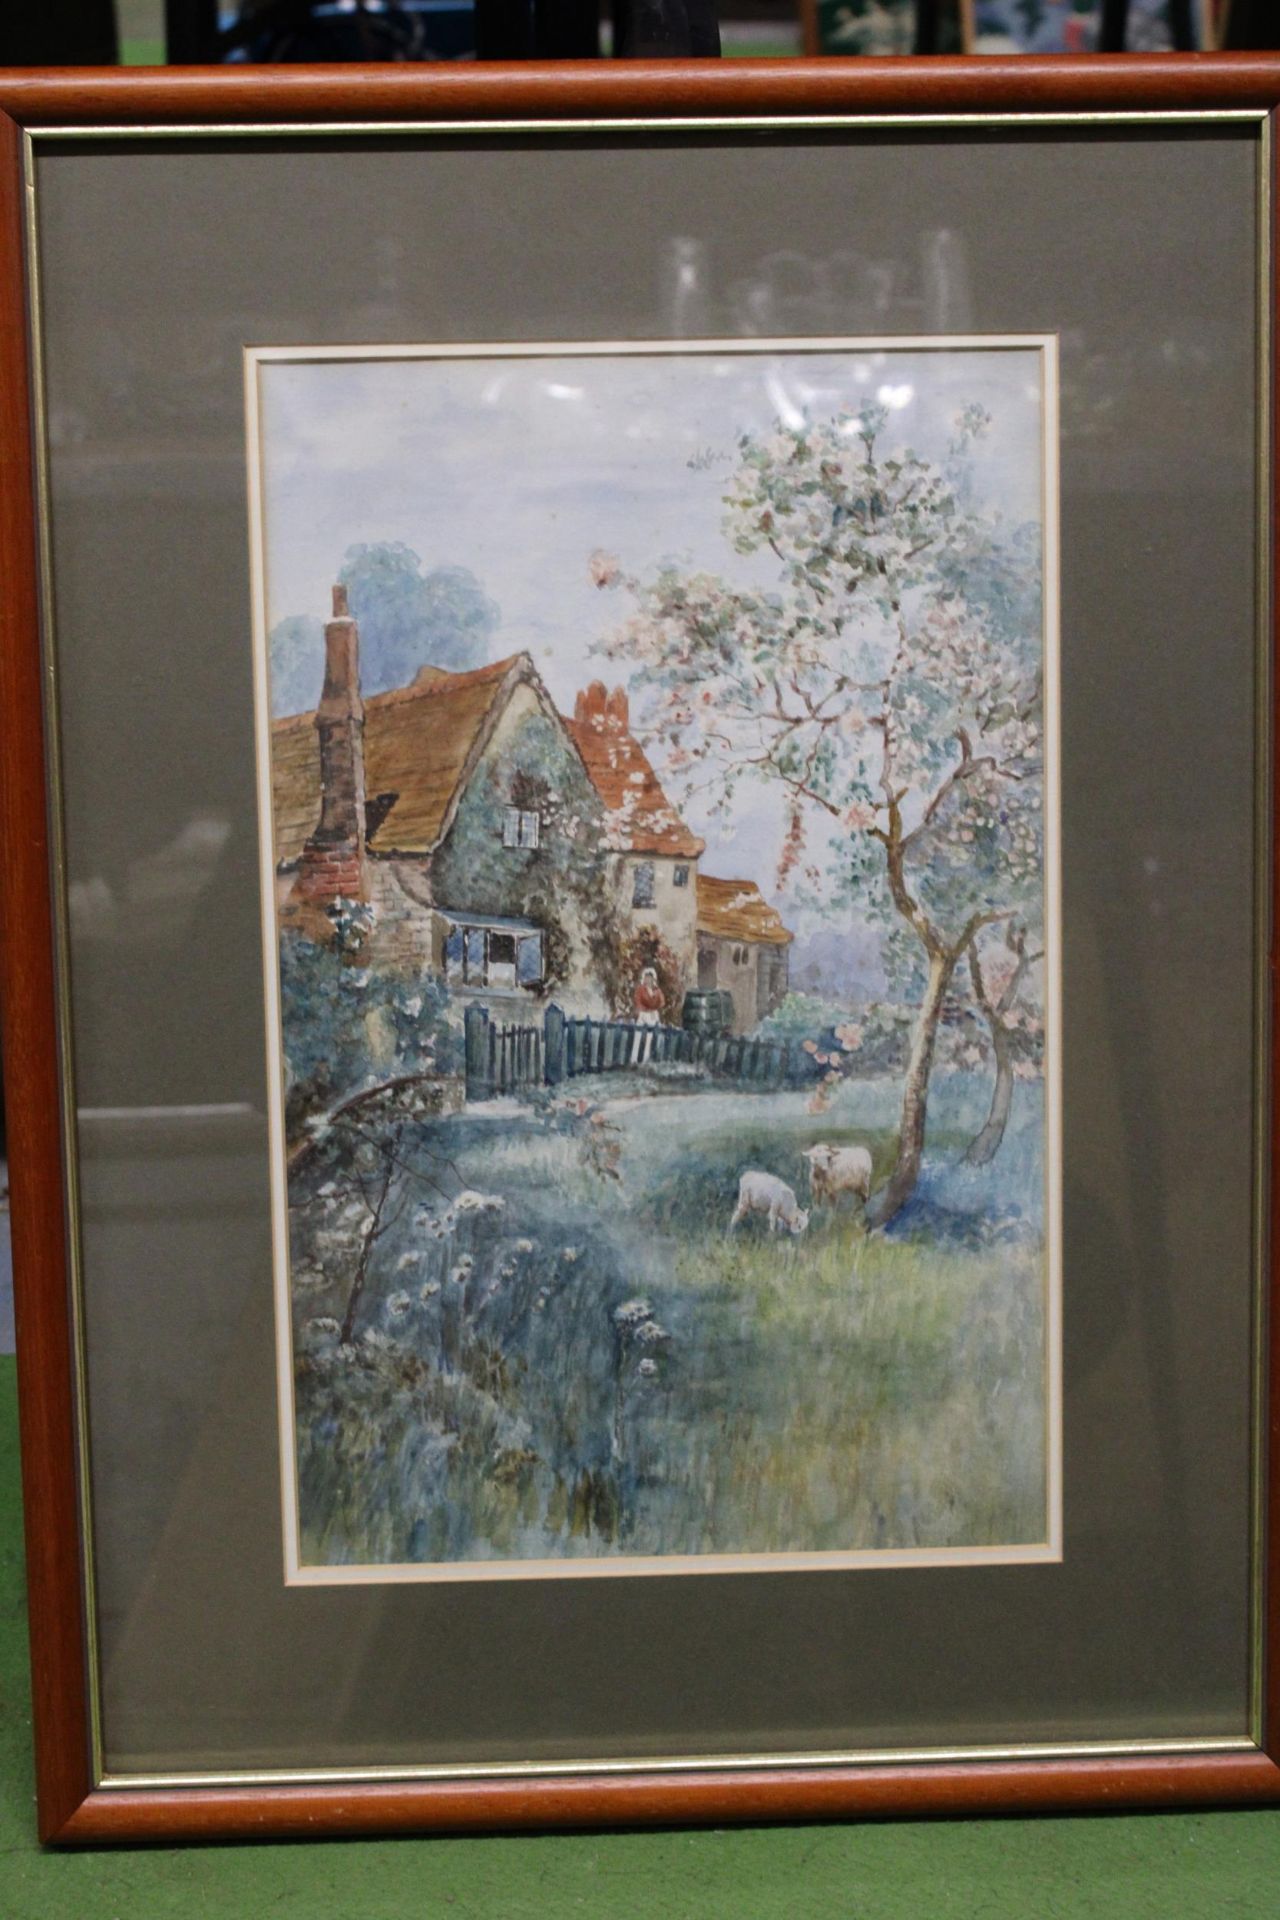 THREE FRAMED PRINTS TO INCLUDE TWO OF LADIES AND ONE OF A RURAL COTTAGE - Image 4 of 4